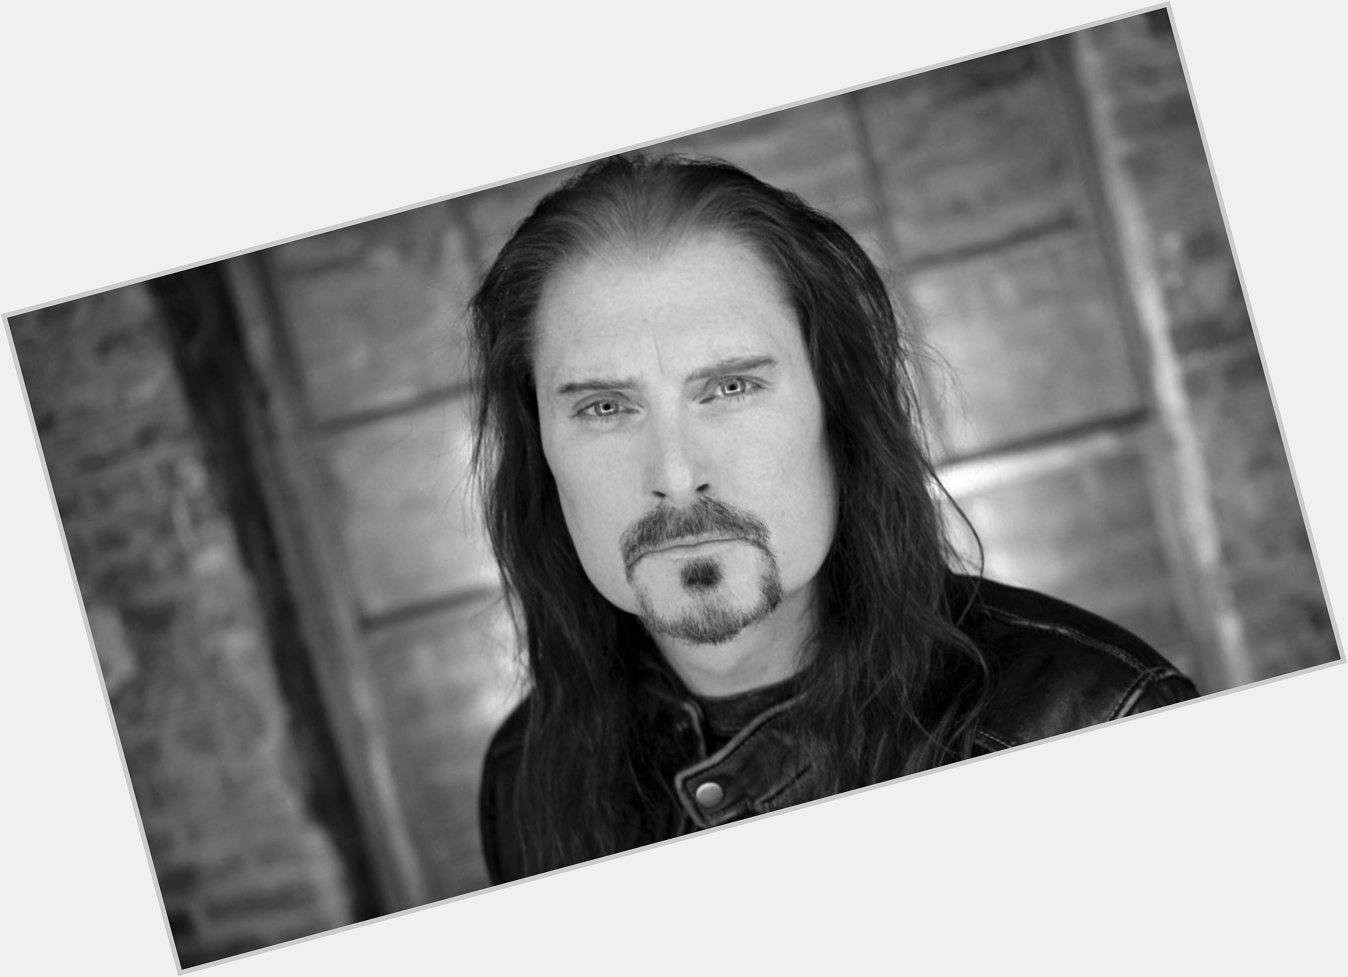 Happy birthday to James LaBrie, who is 54 today! 